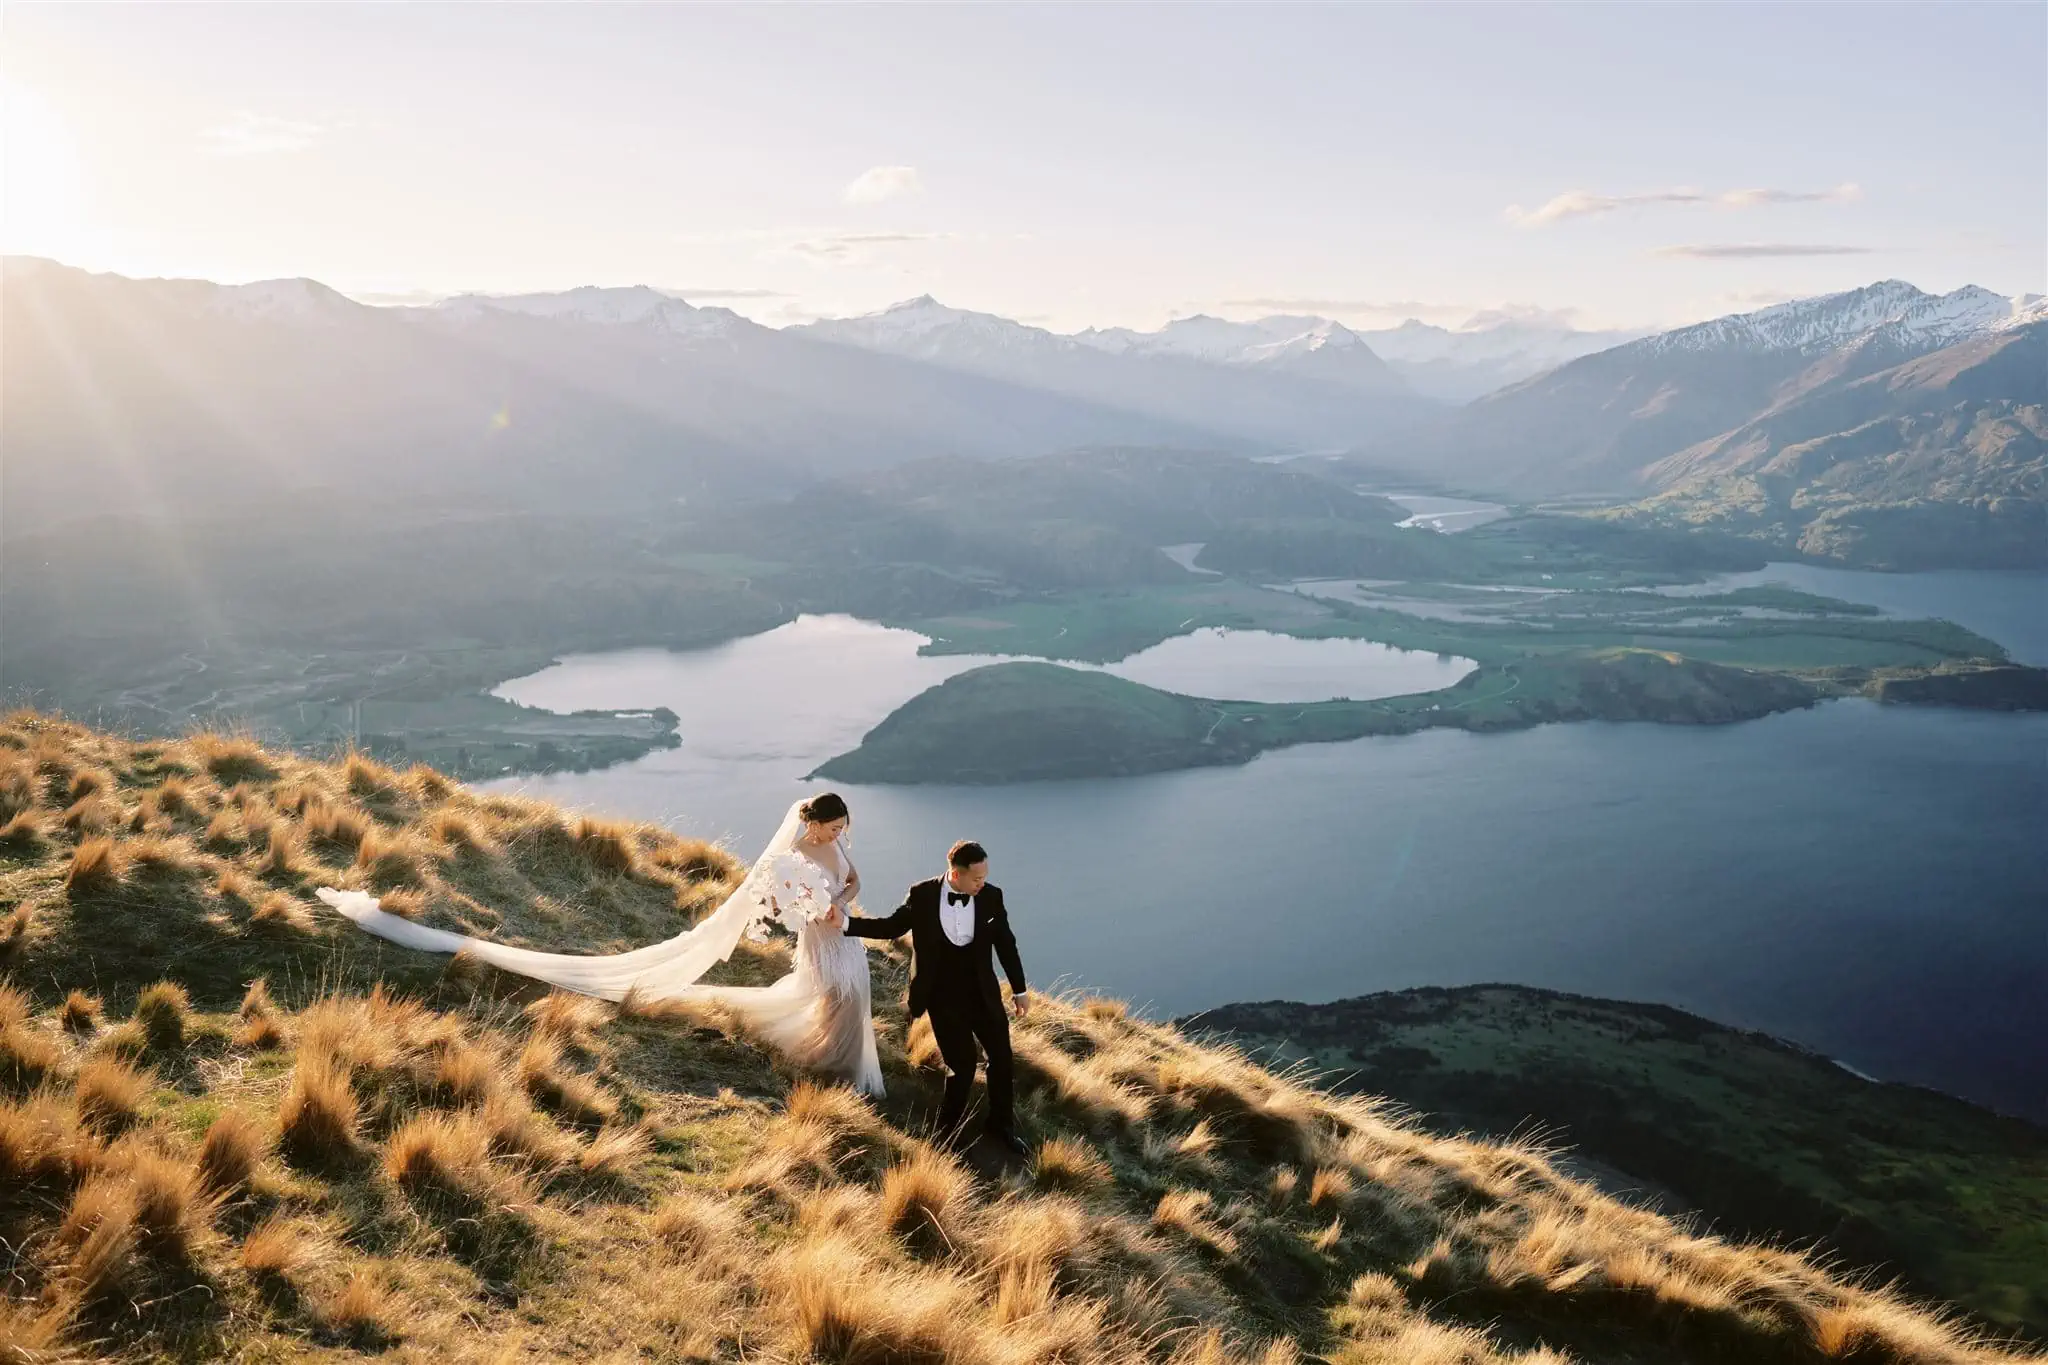 Queenstown New Zealand Elopement Wedding Photographer - Bride and groom enjoying a stunning view of Lake Wanaka during their Queenstown heli-wedding package.